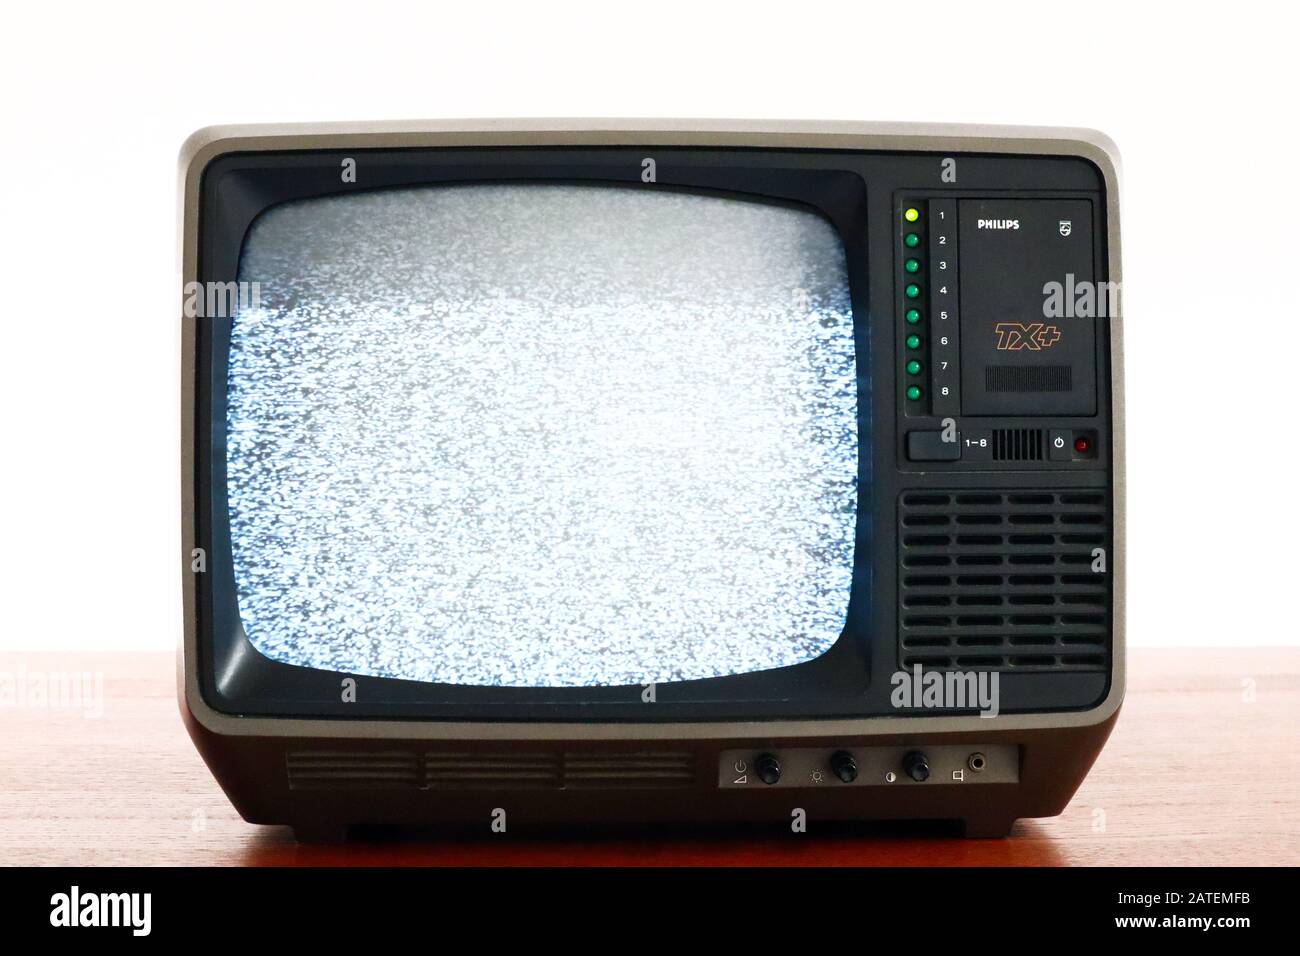 Philips Tv High Resolution Stock Photography and Images - Alamy